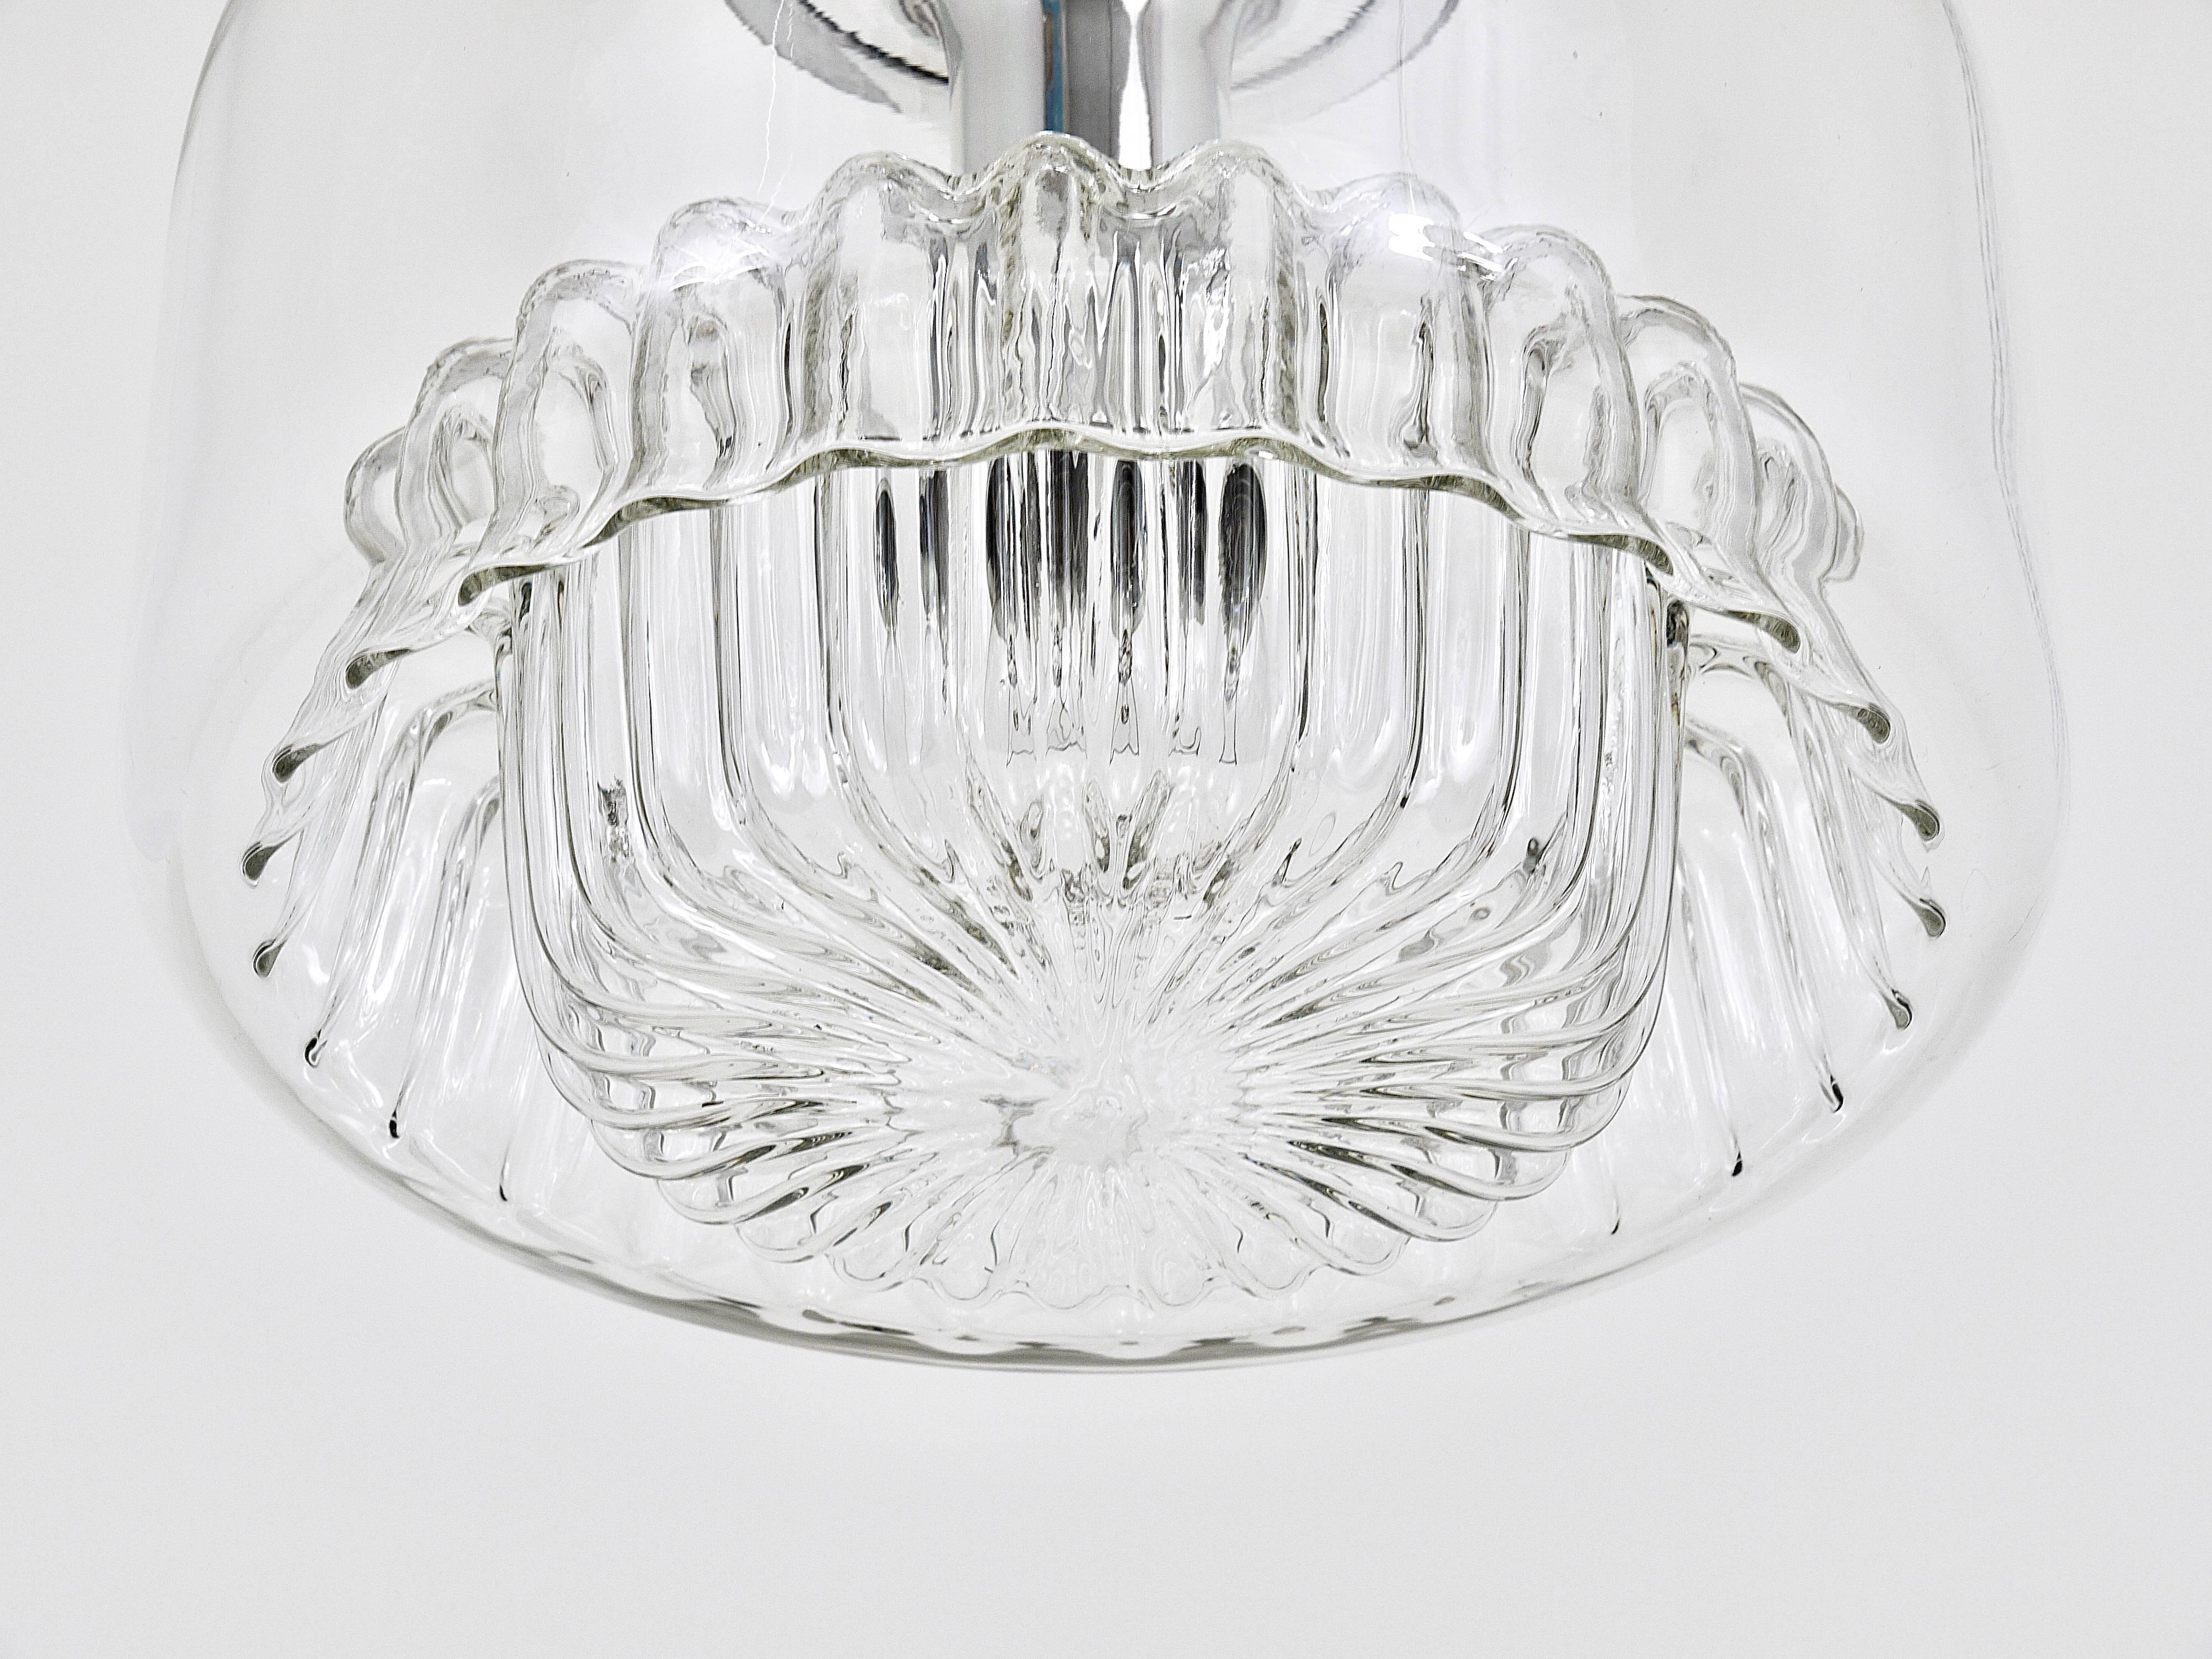 Up to two exquisite modernist pendant lights from the 1970s, each sold individually and priced per item. These stunning lights feature globe-shaped lampshades made of clear molded glass, complemented by chromed fittings. Crafted by Peill and Putzler